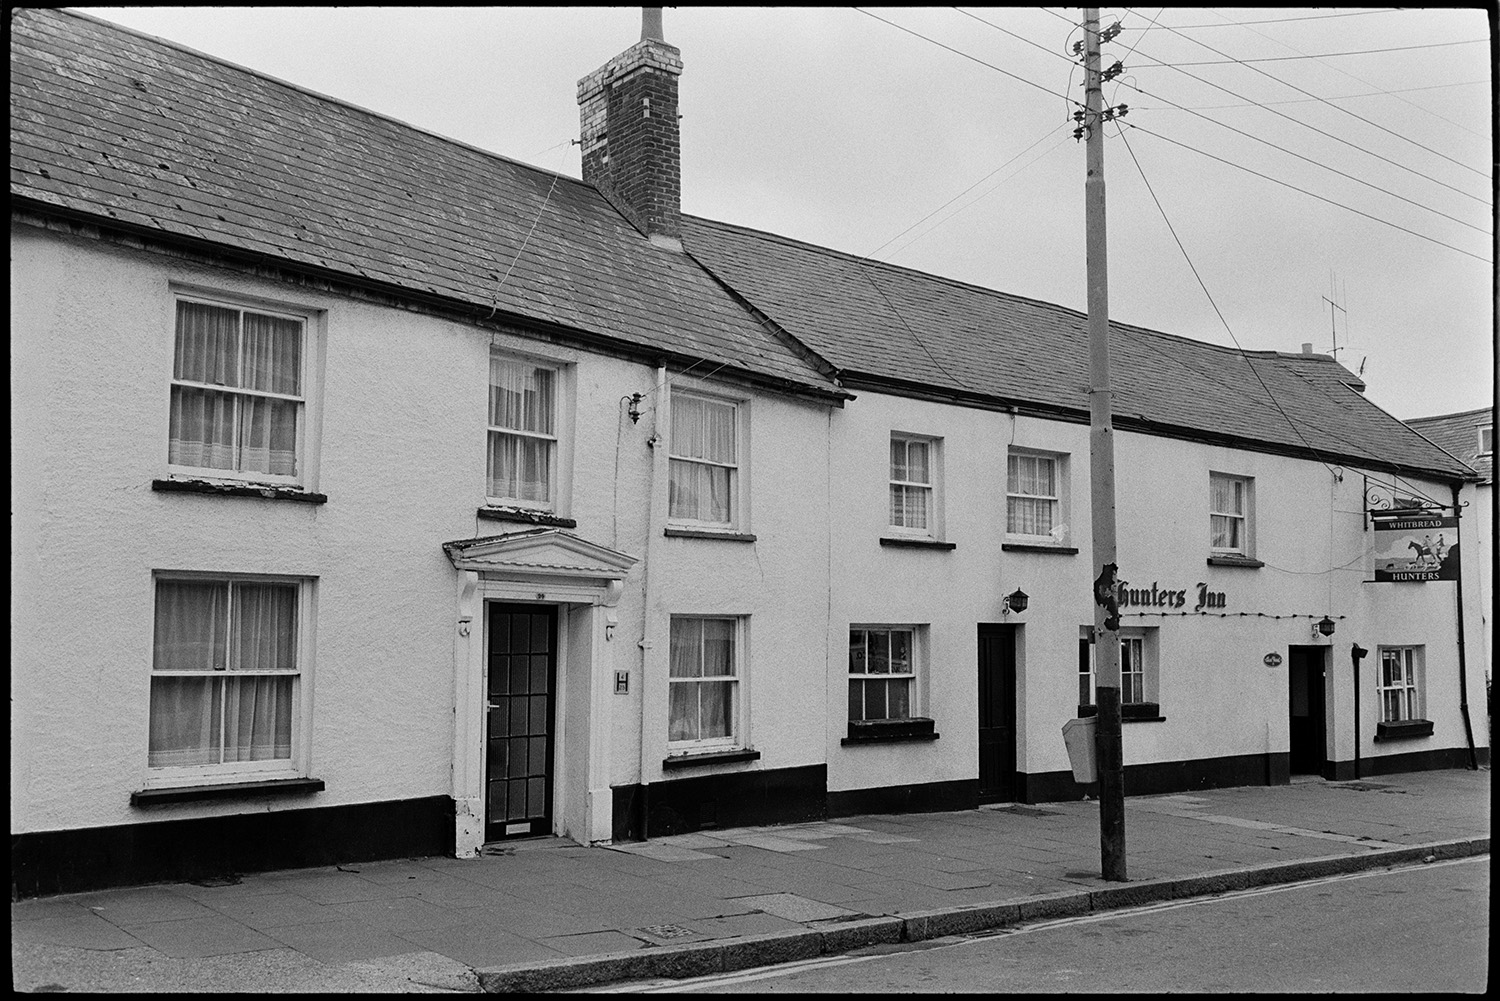 Scenes around town, comparison with old photos, railway line and station, lorries and cars, river.
[The front of The Hunters Inn at Torrington. The house next door is also visible on the street.]